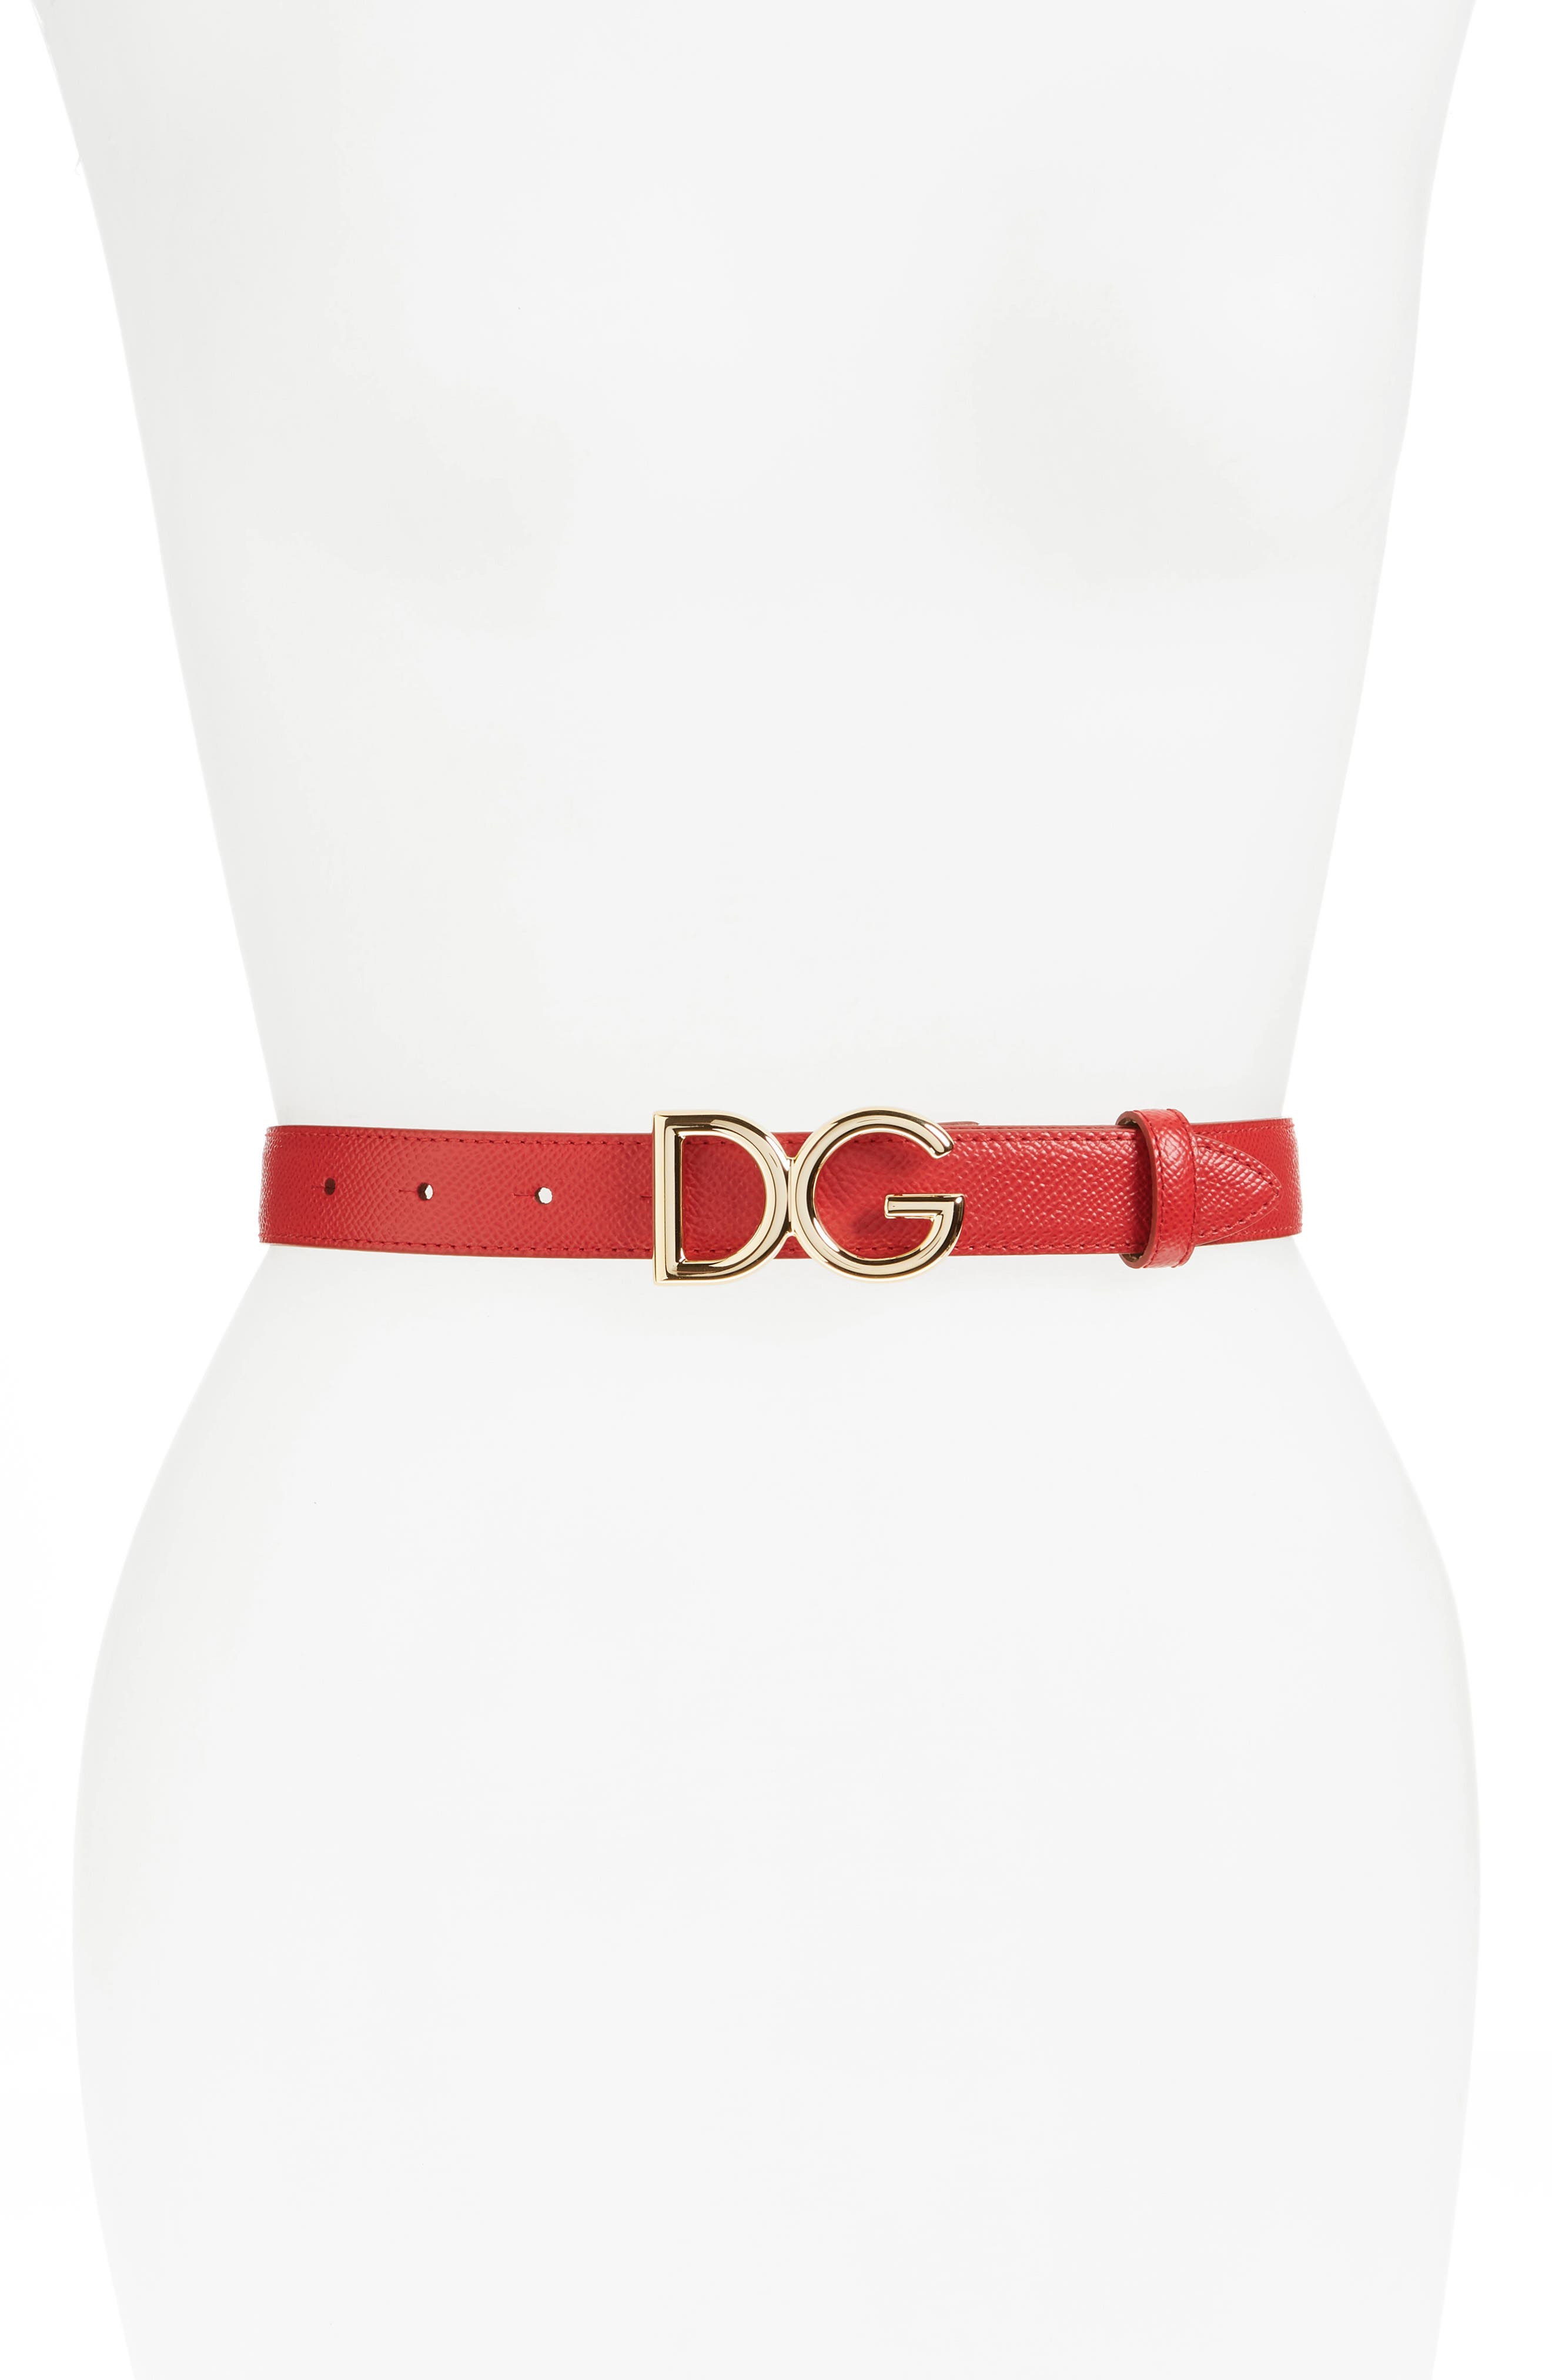 Dolce & Gabbana Leather Belt in Rosso at Nordstrom, Size 75